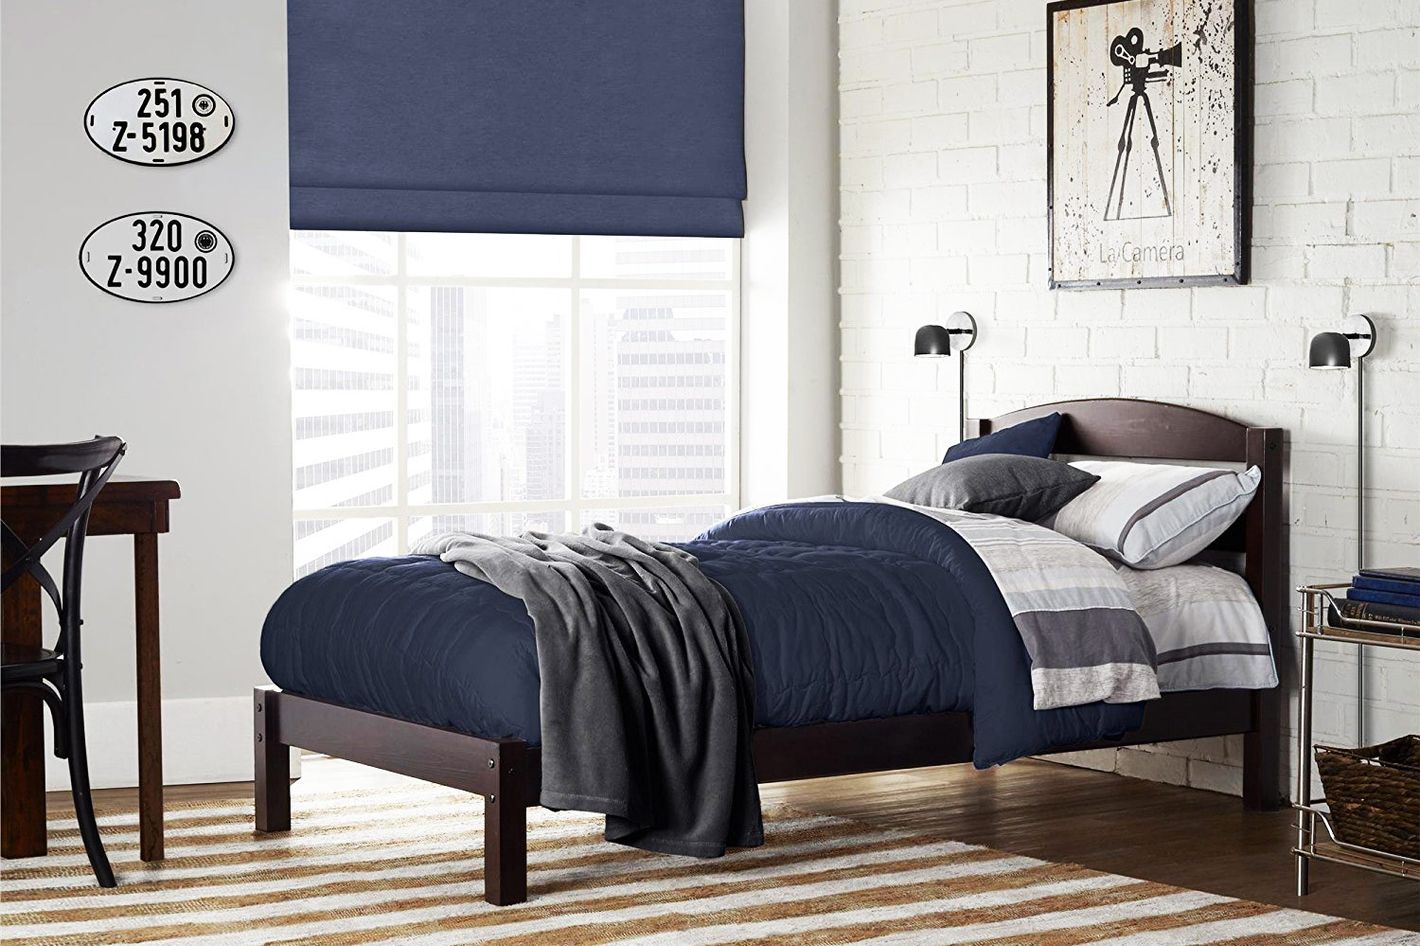 12 Best Twin Beds For Kids 2019, Weekends Only Twin Beds